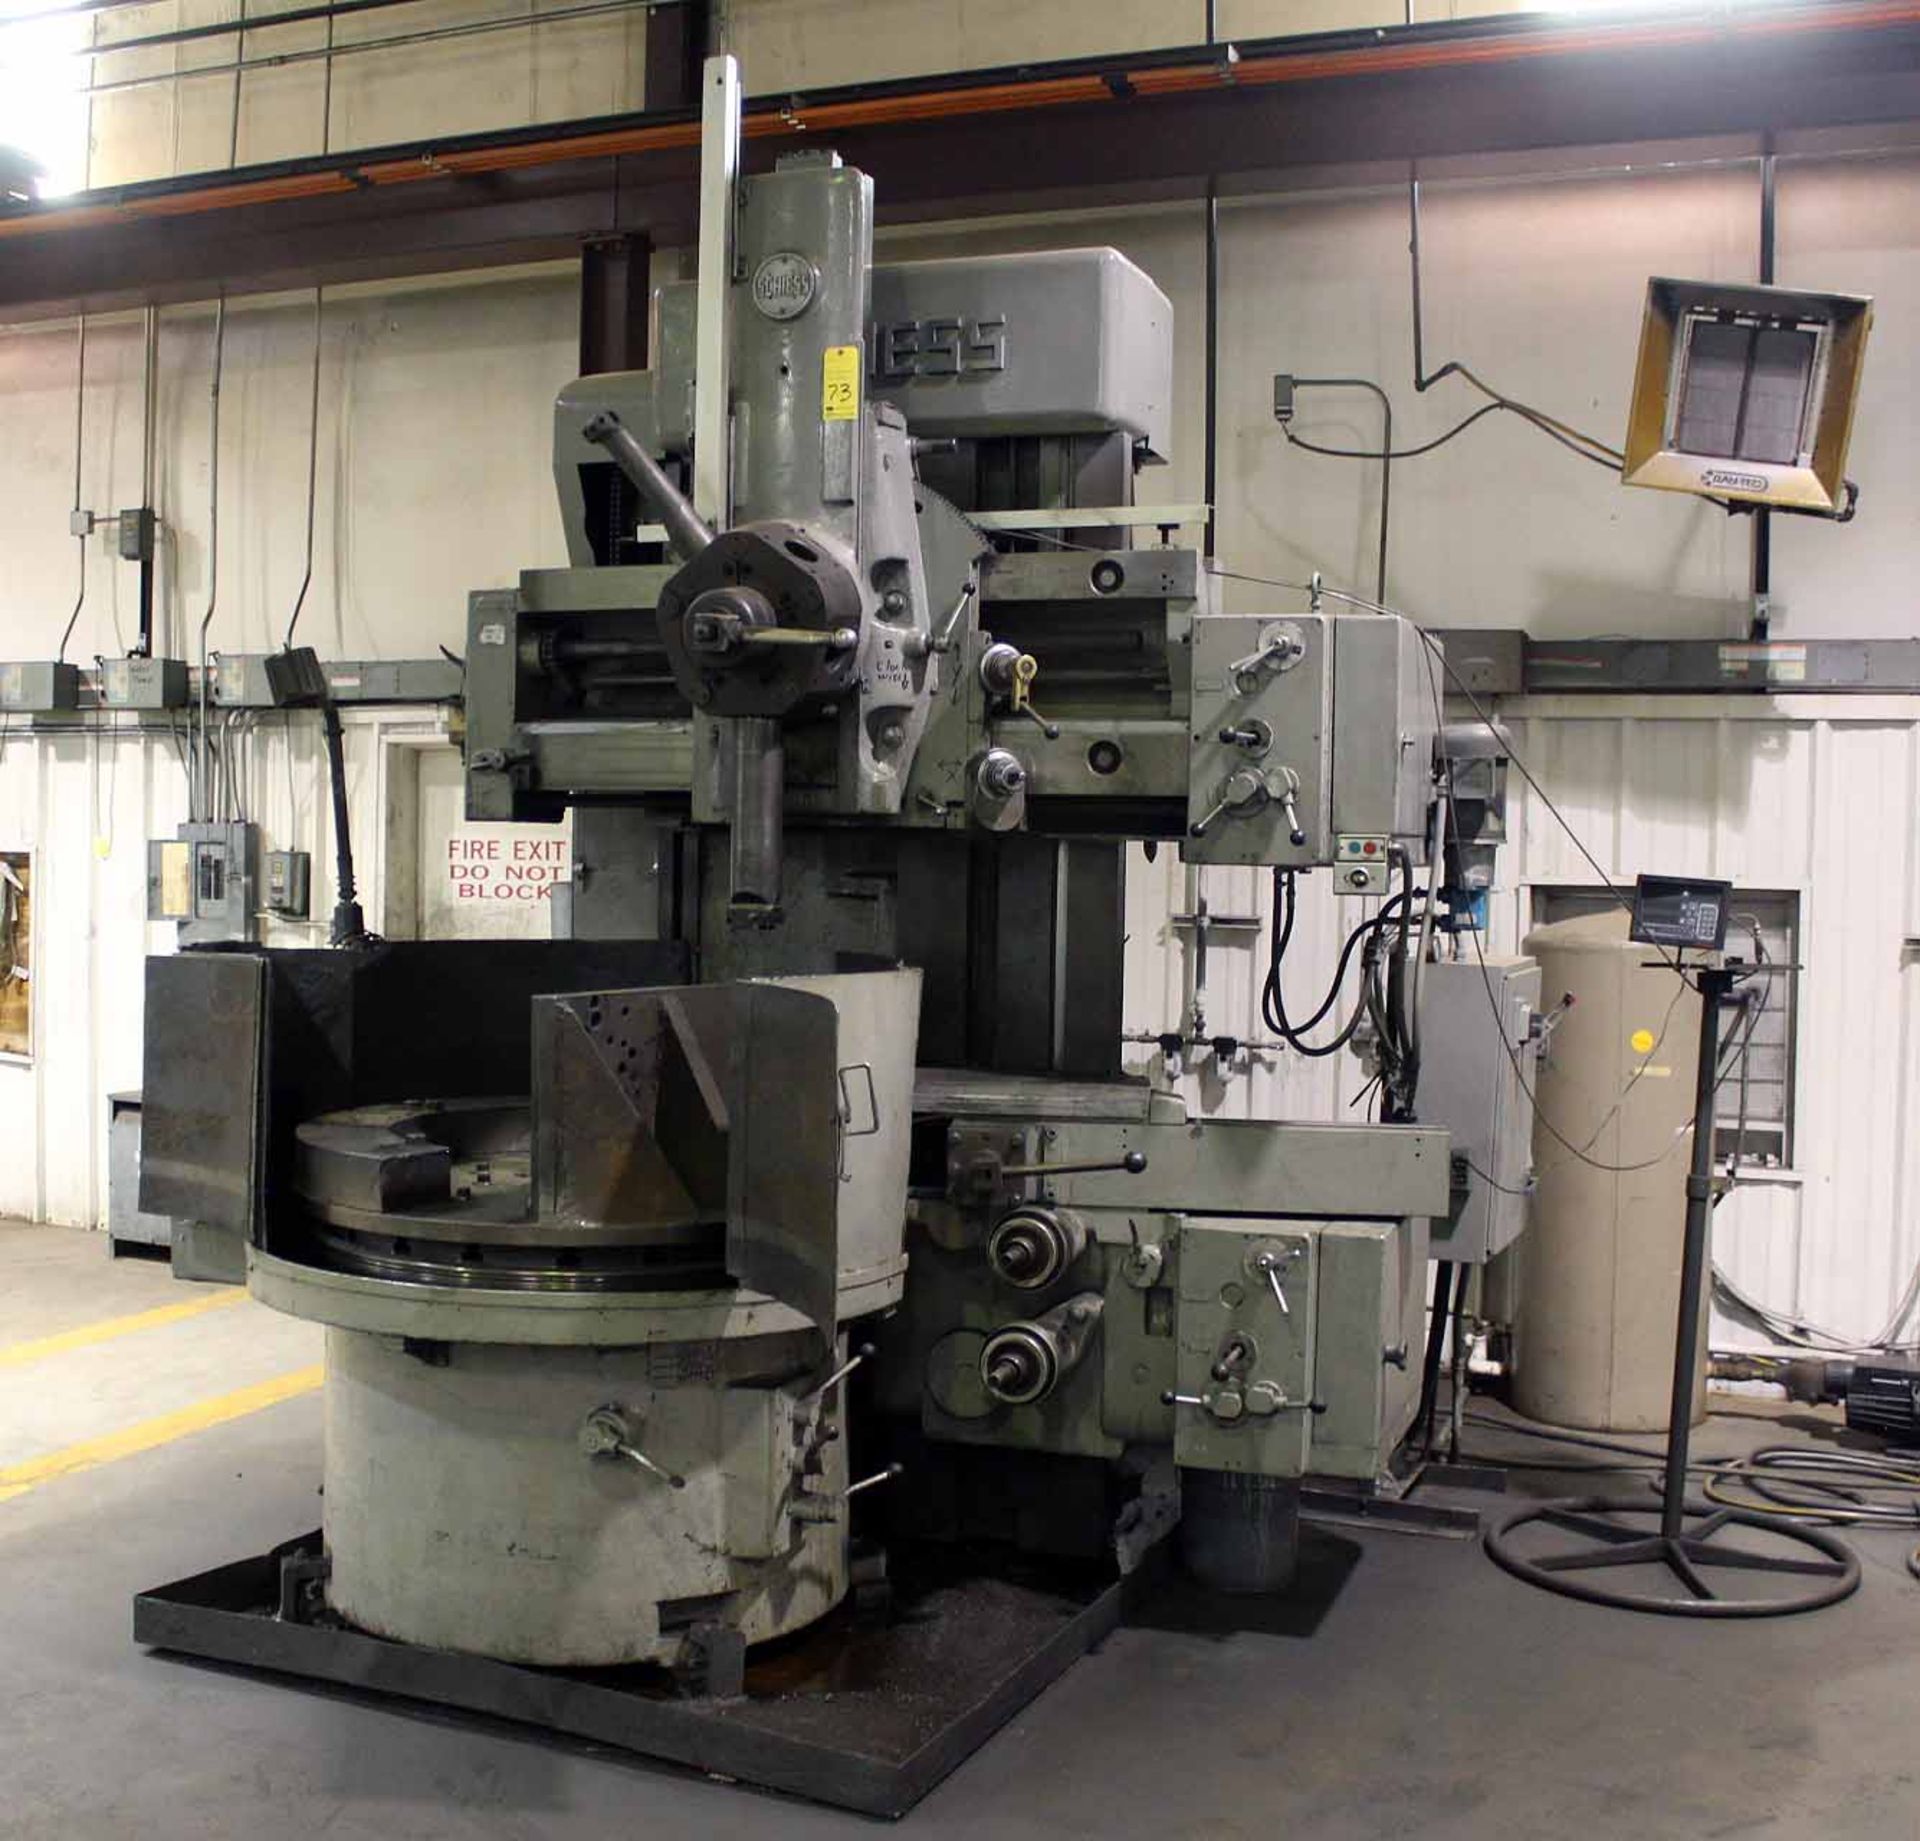 VERTICAL TURRET LATHE, SCHIESS MDL. 13ED-125, 49.2” table, 55.1” swing, 43.3” turning height, 9,